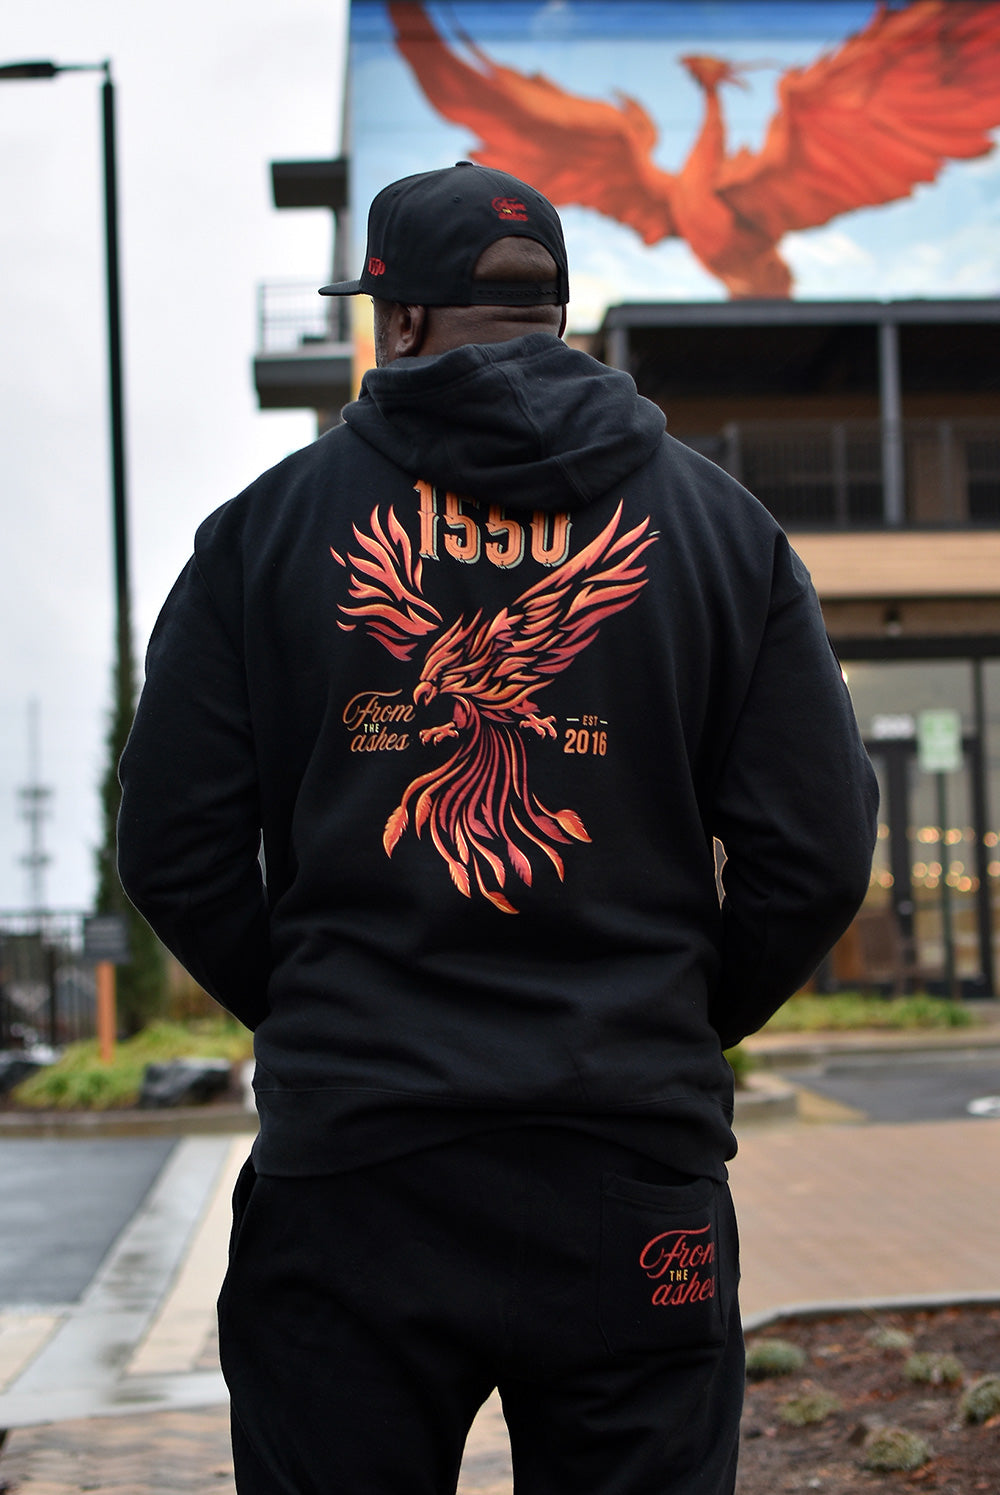 FROM THE ASHES HOODIE